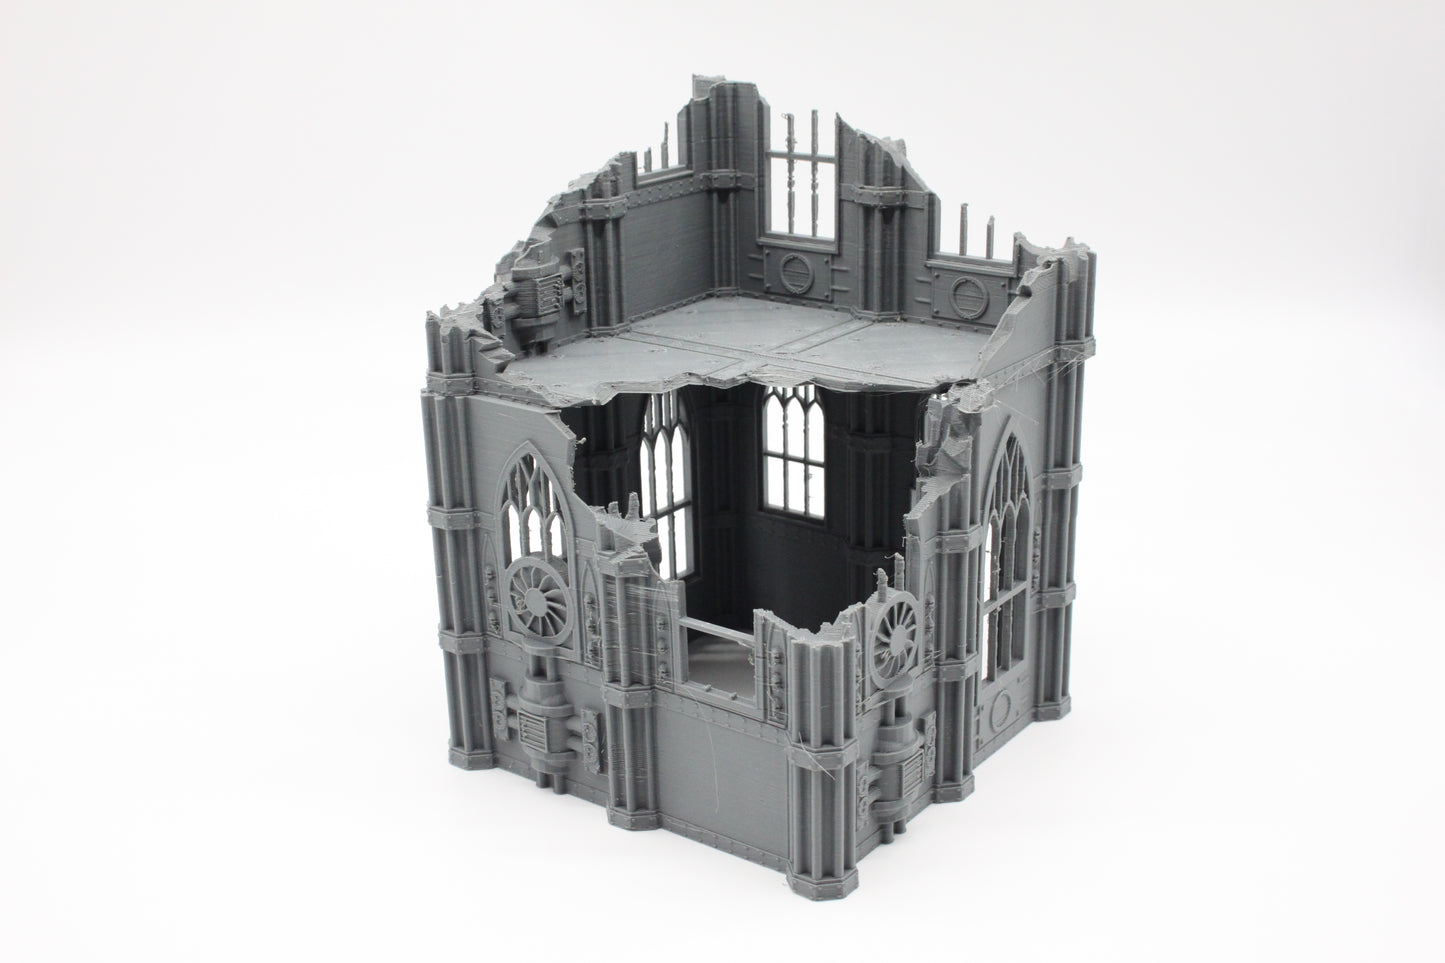 Bundle 3 of Gothic Ruined Buildings